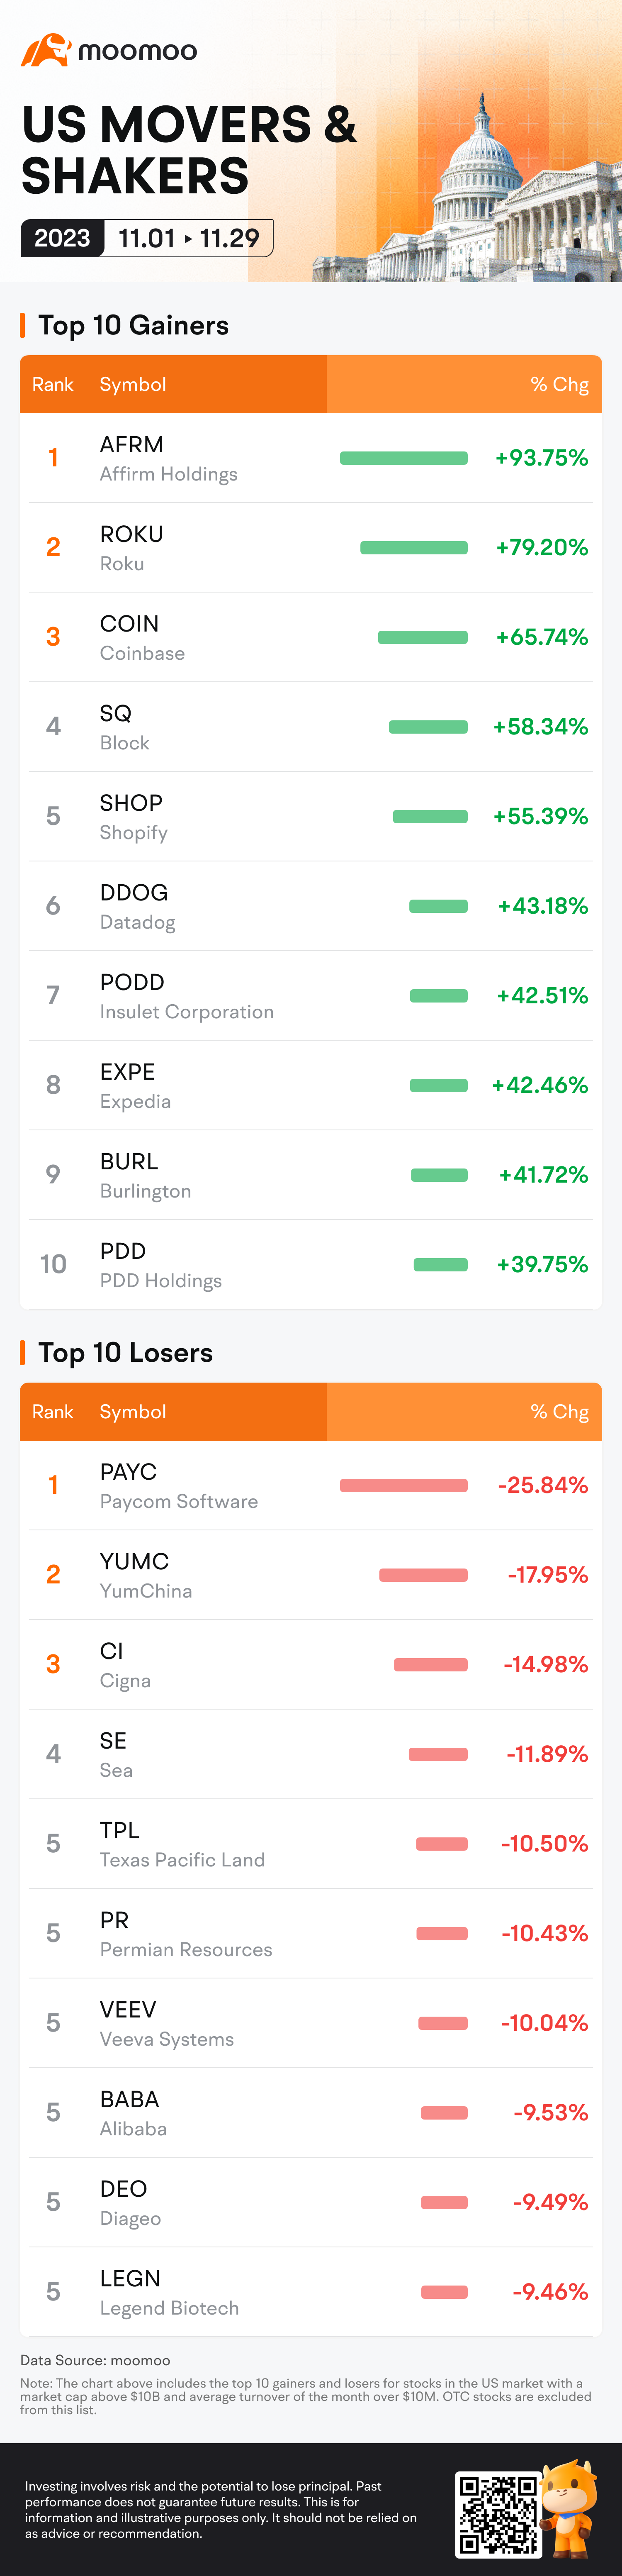 US Market Movers & Shakers in November: AFRM, ROKU, COIN, SQ and More